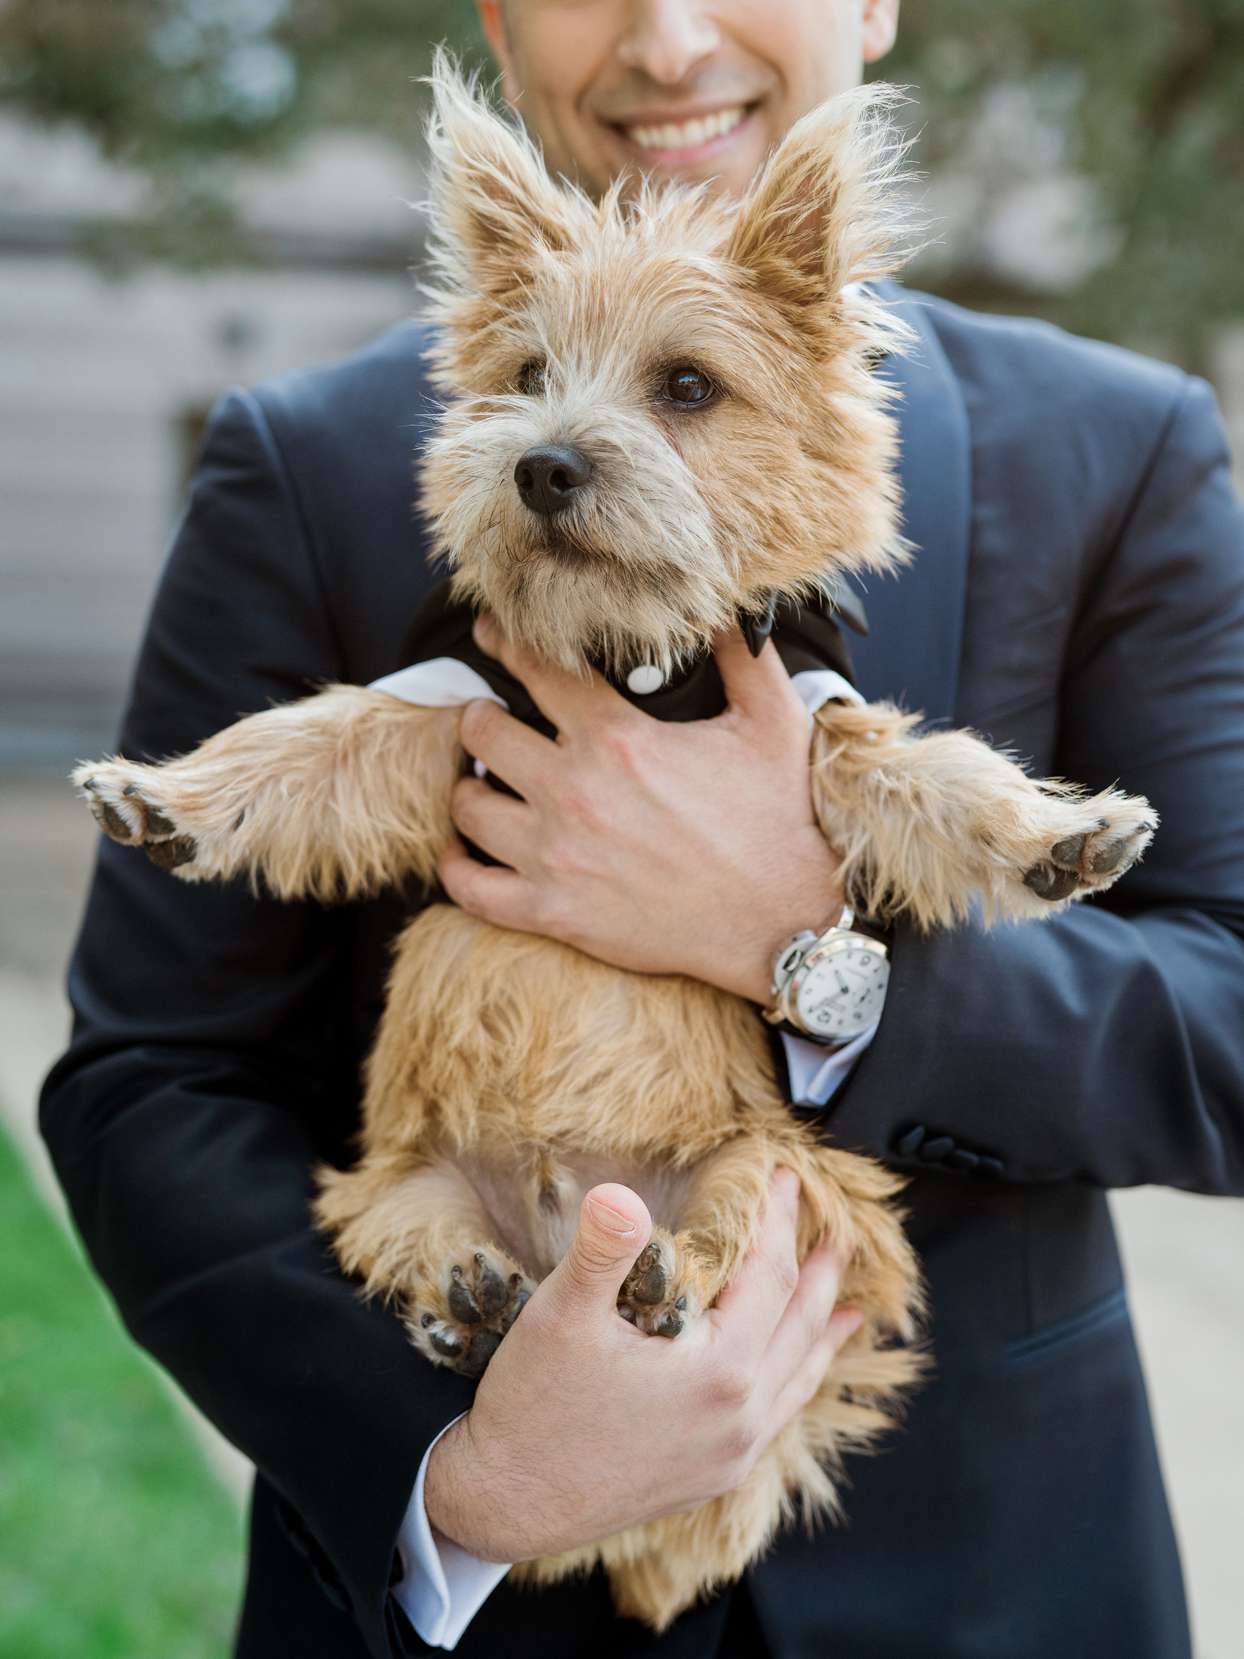 groom holding dressed up puppy